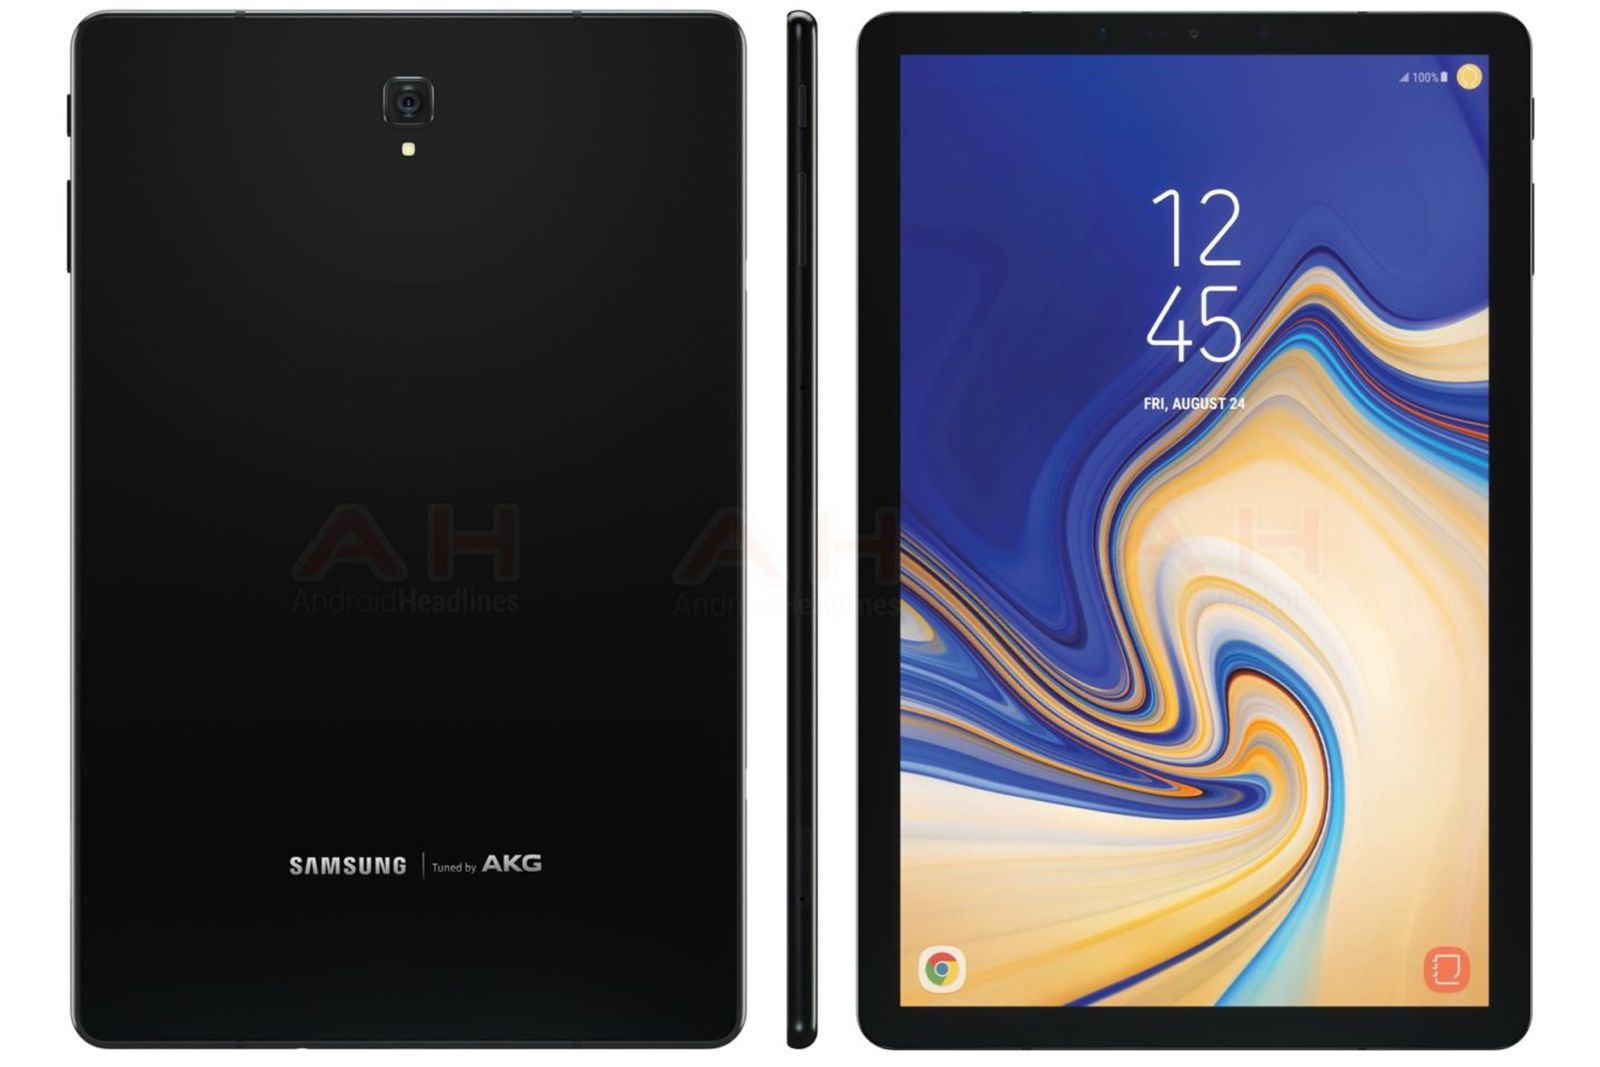 Official Samsung Galaxy Tab S4 press image leaks must be announced soon surely image 1